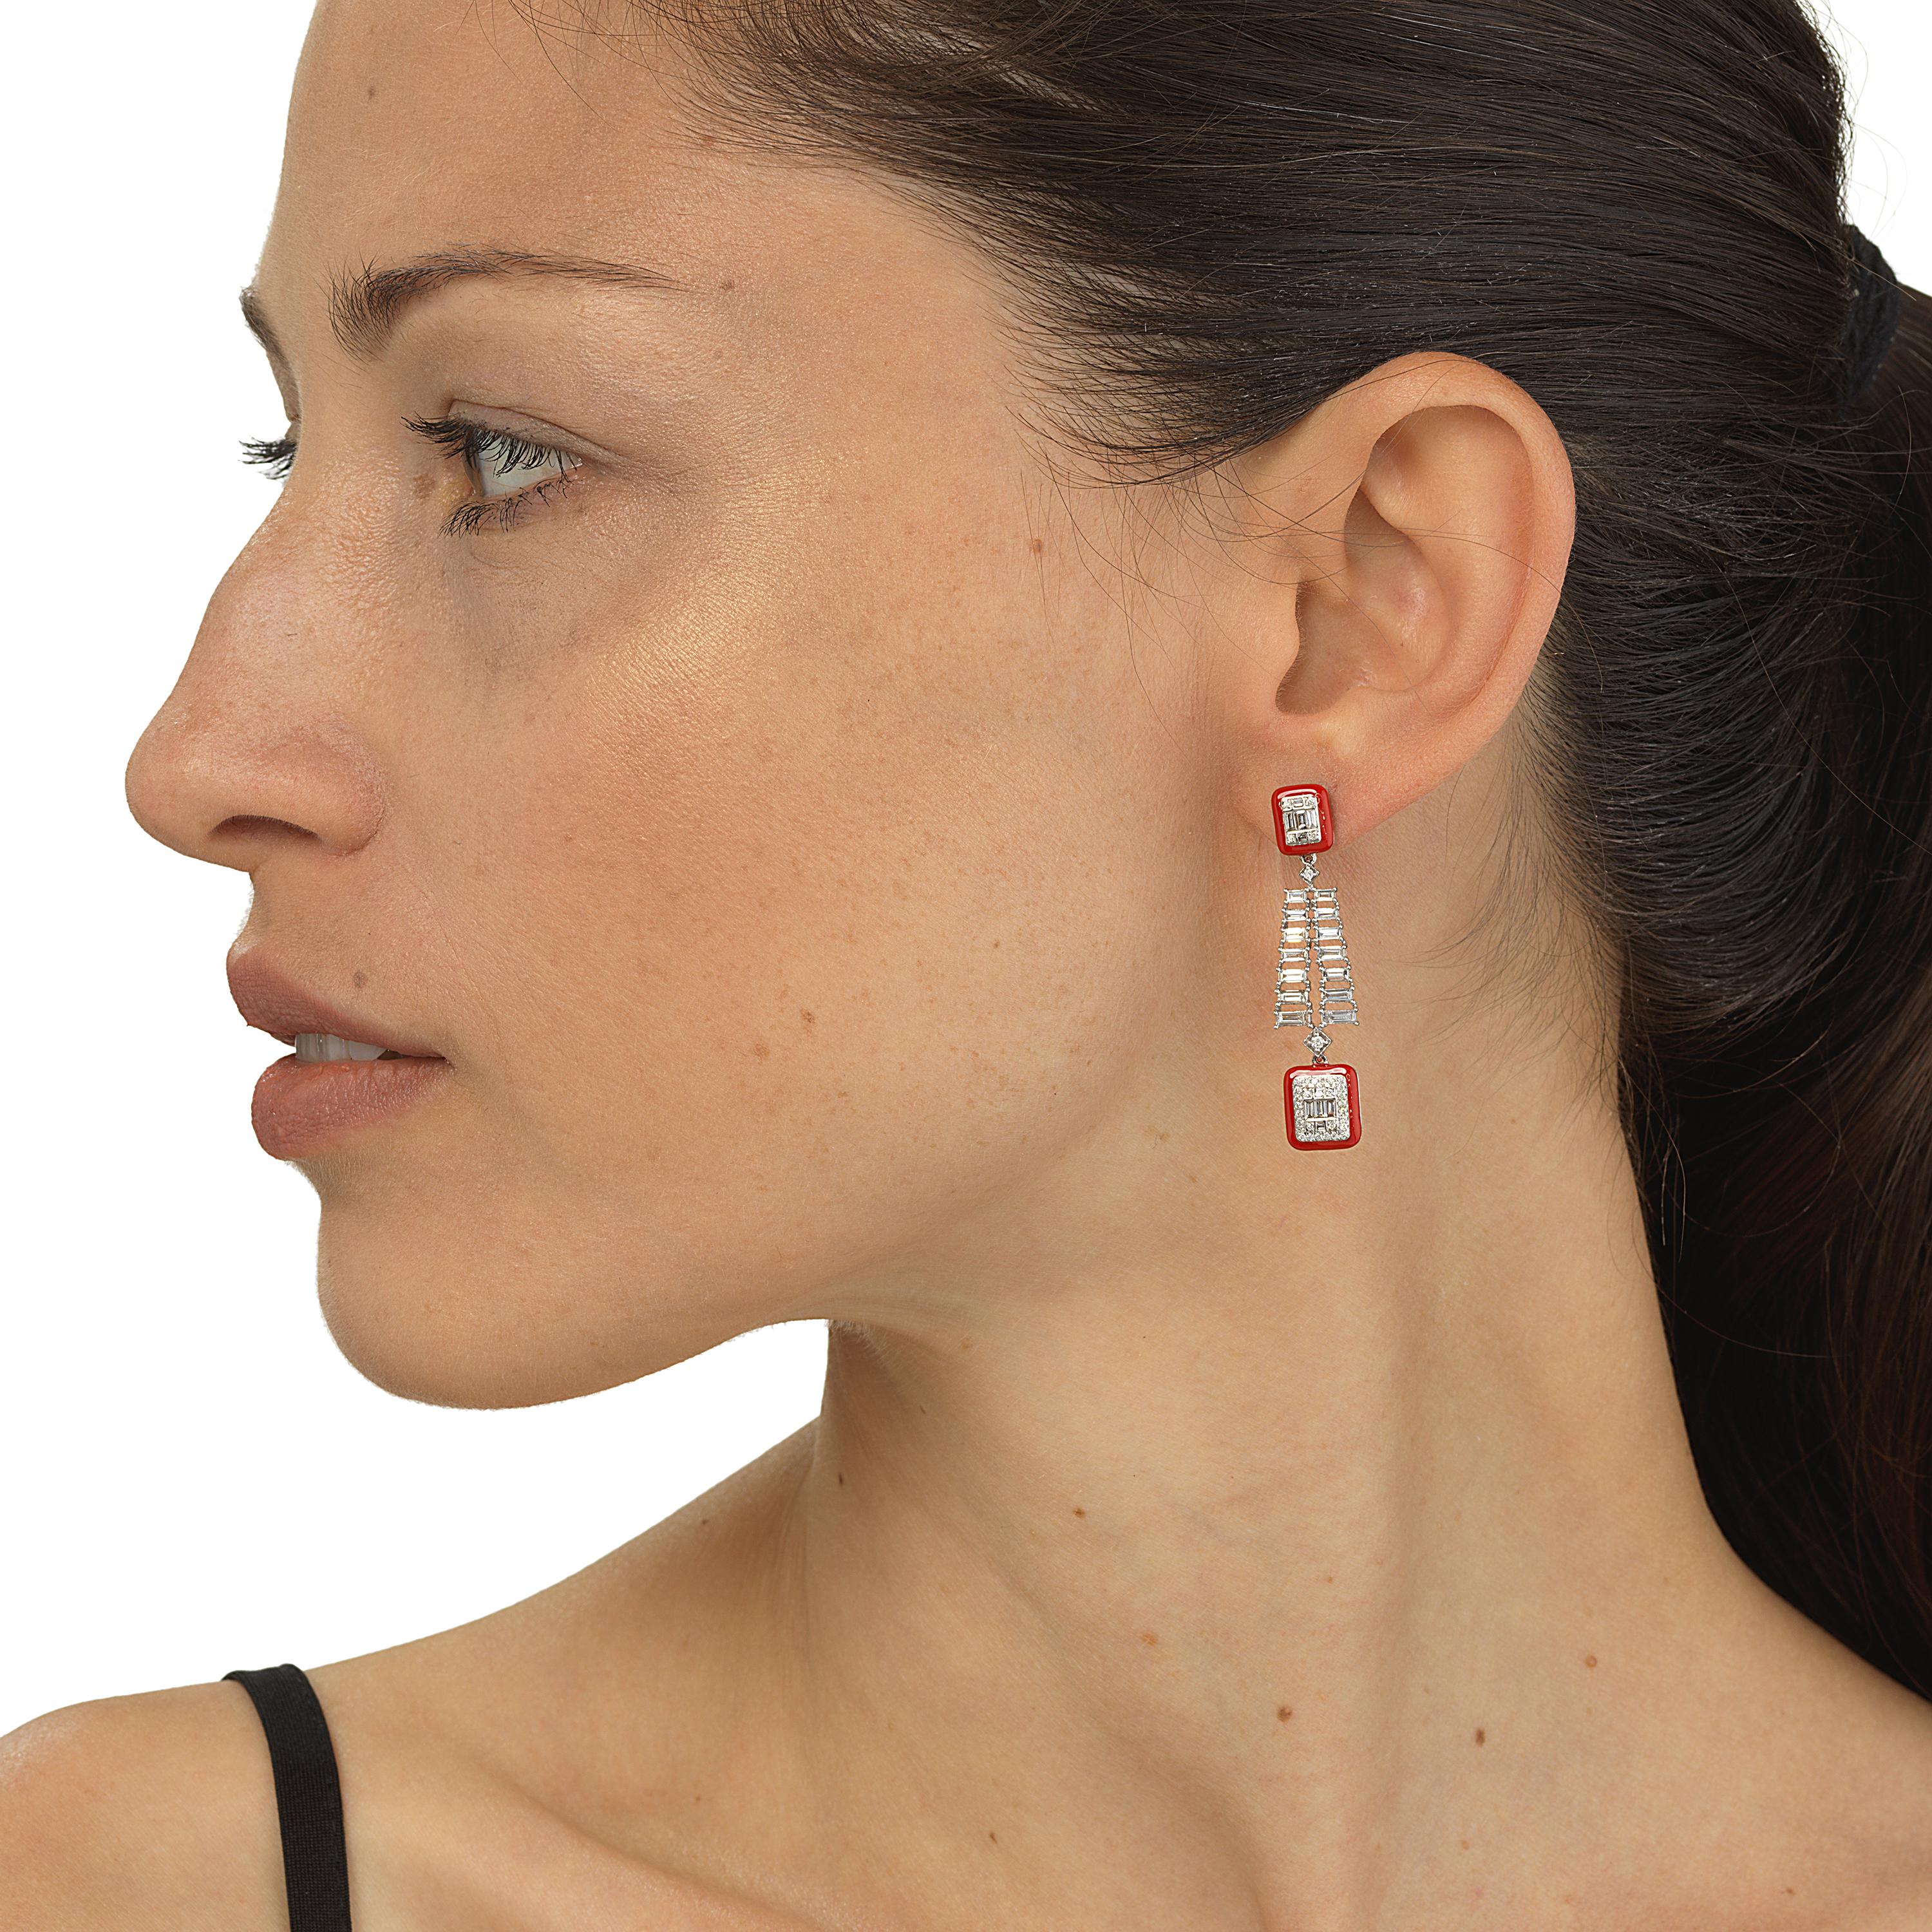 A pair crafted in 18 Karat white gold featured cascading baguette diamonds with frame-shaped drops by Luxle. Each pair is embellished with 1.65 Cts of diamonds. The hand-painted red enamel adds a pop of color to the pair. It comes with a post and